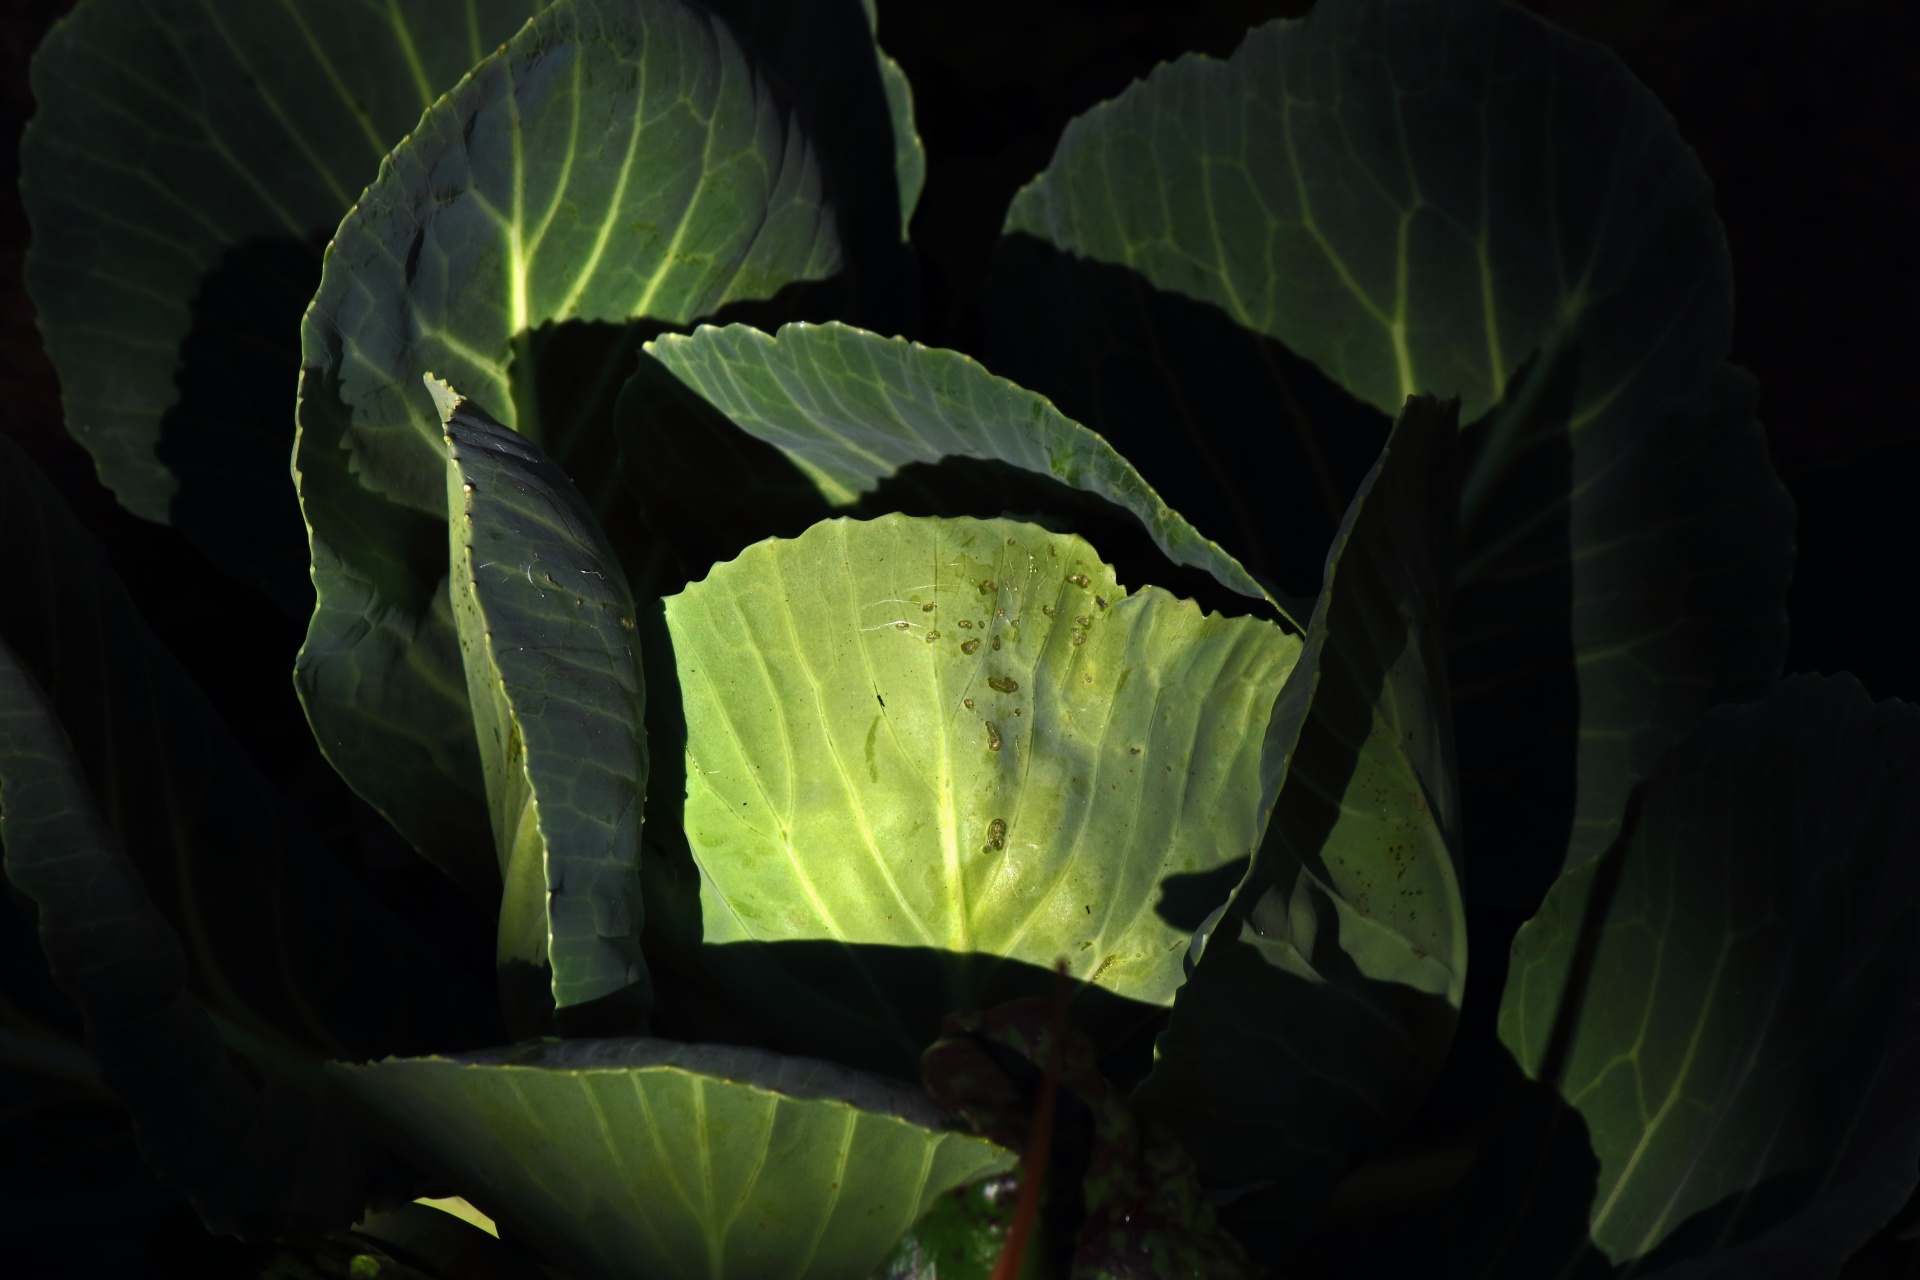 Light On Outer Leaves Of Cabbage